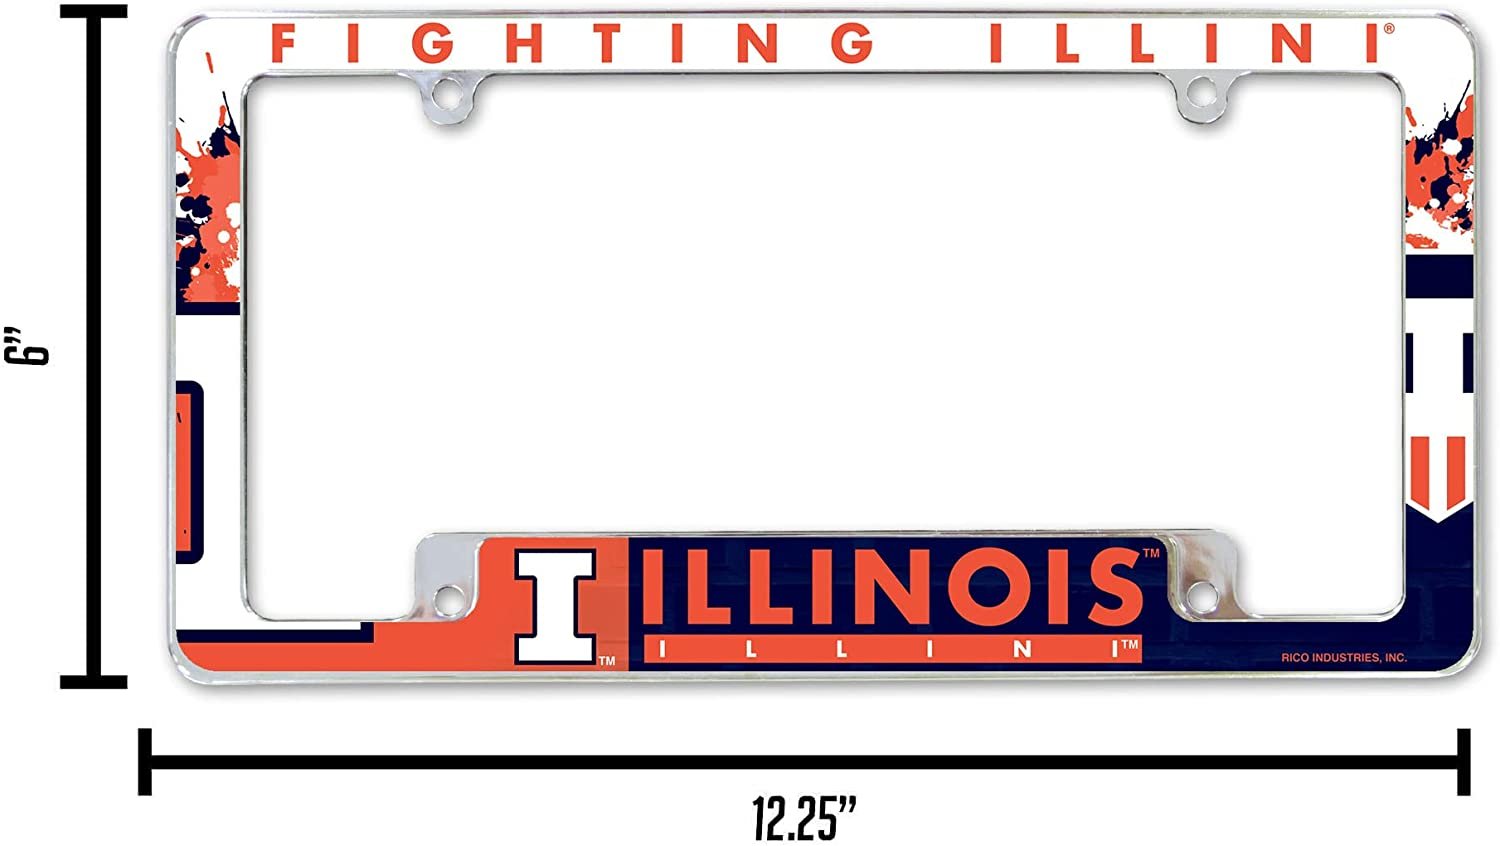 University of Illinois Fighting Illini Metal License Plate Frame Chrome Tag Cover All Over Design 6x12 Inch